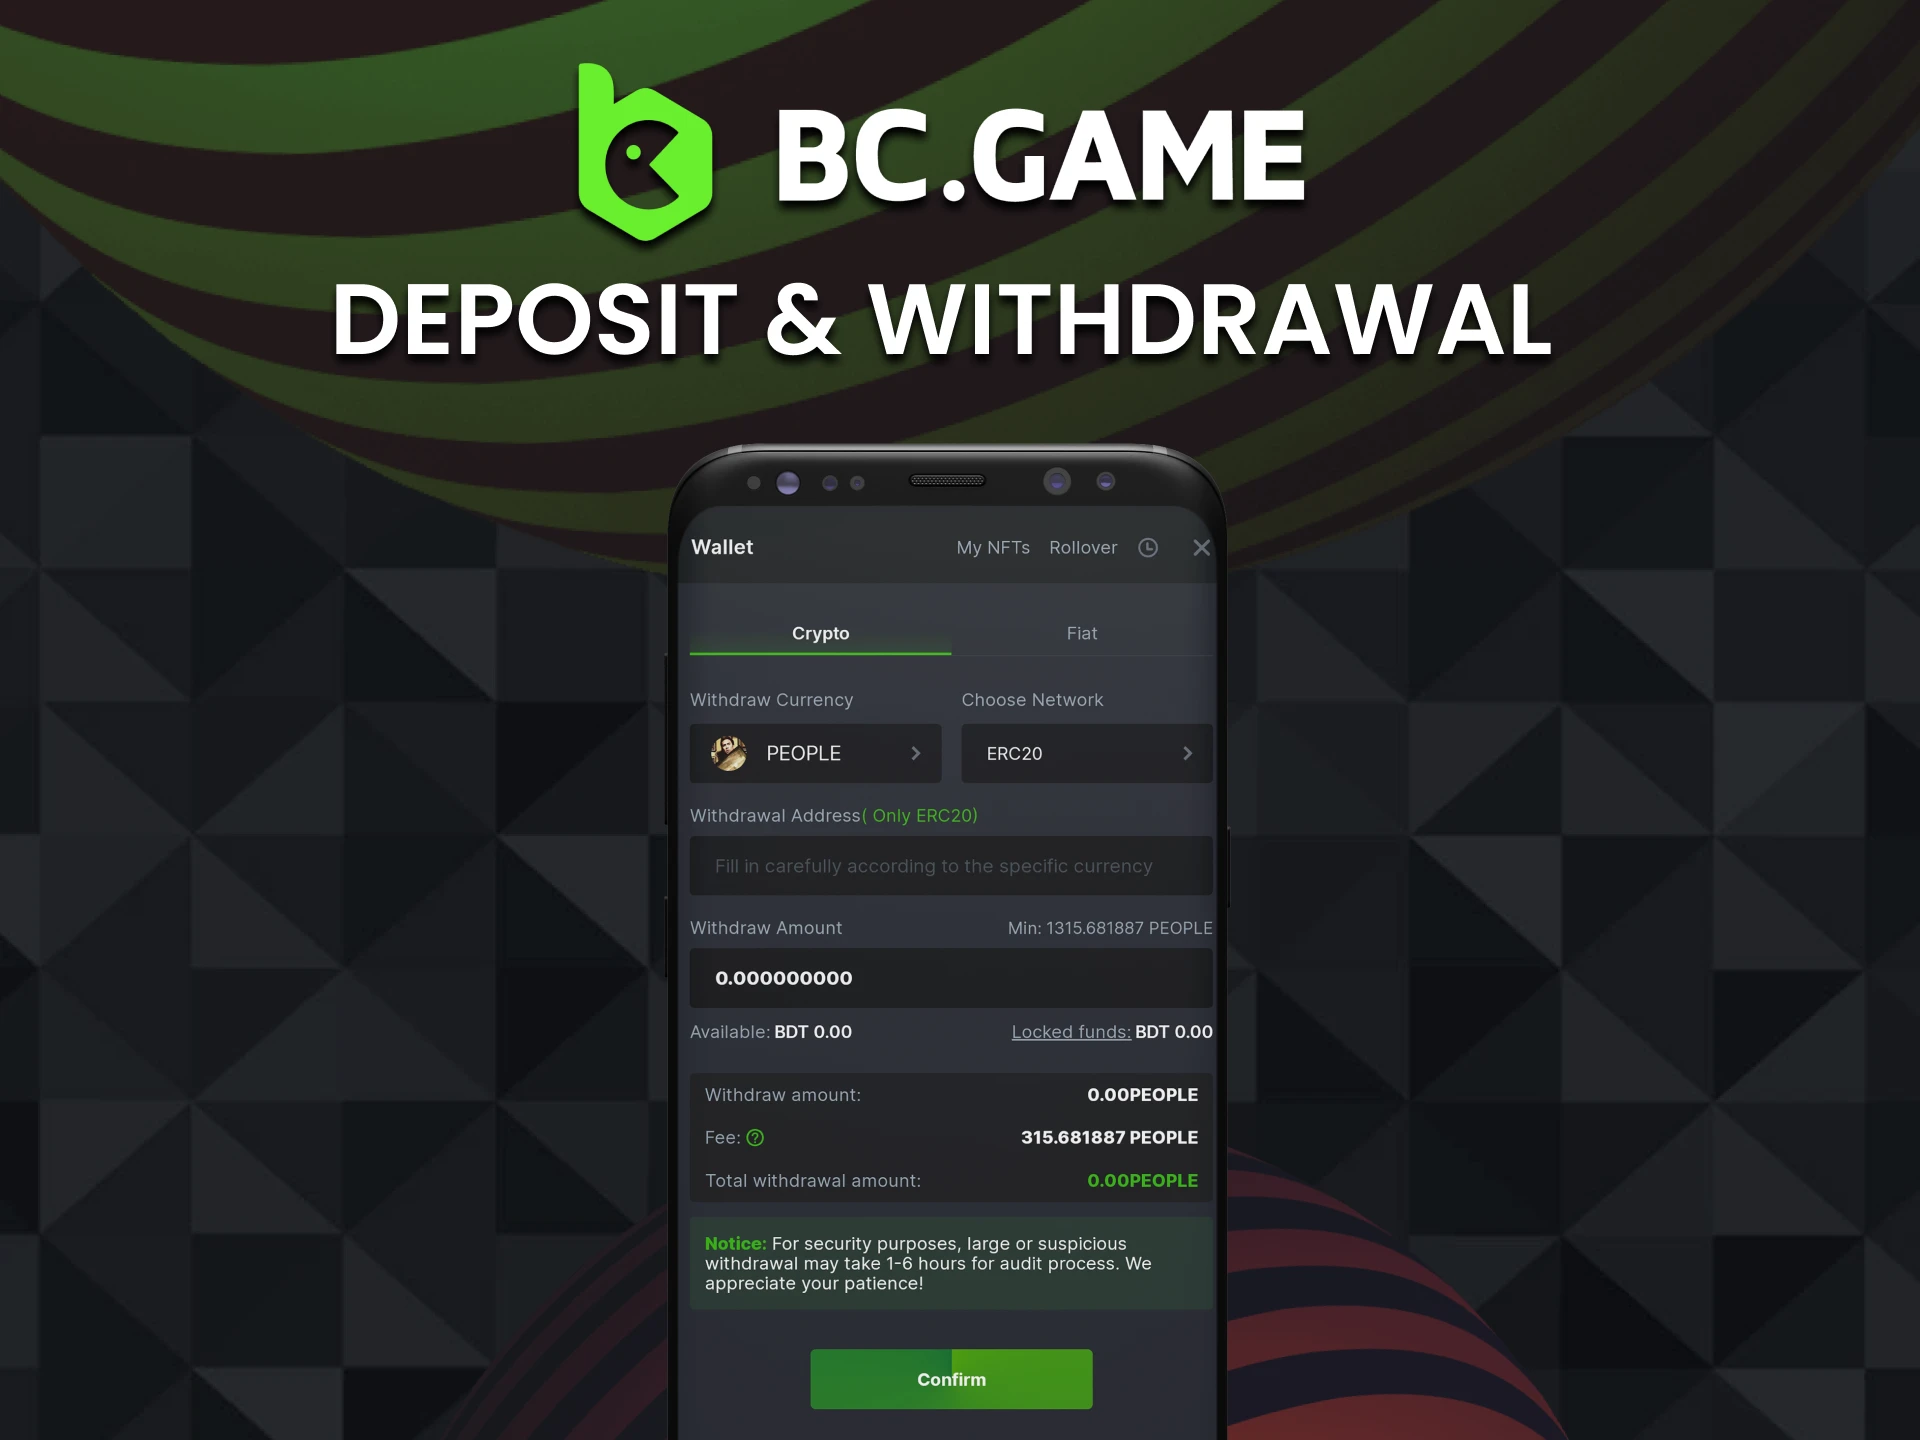 You can deposit and withdraw funds directly in the BC Game app.